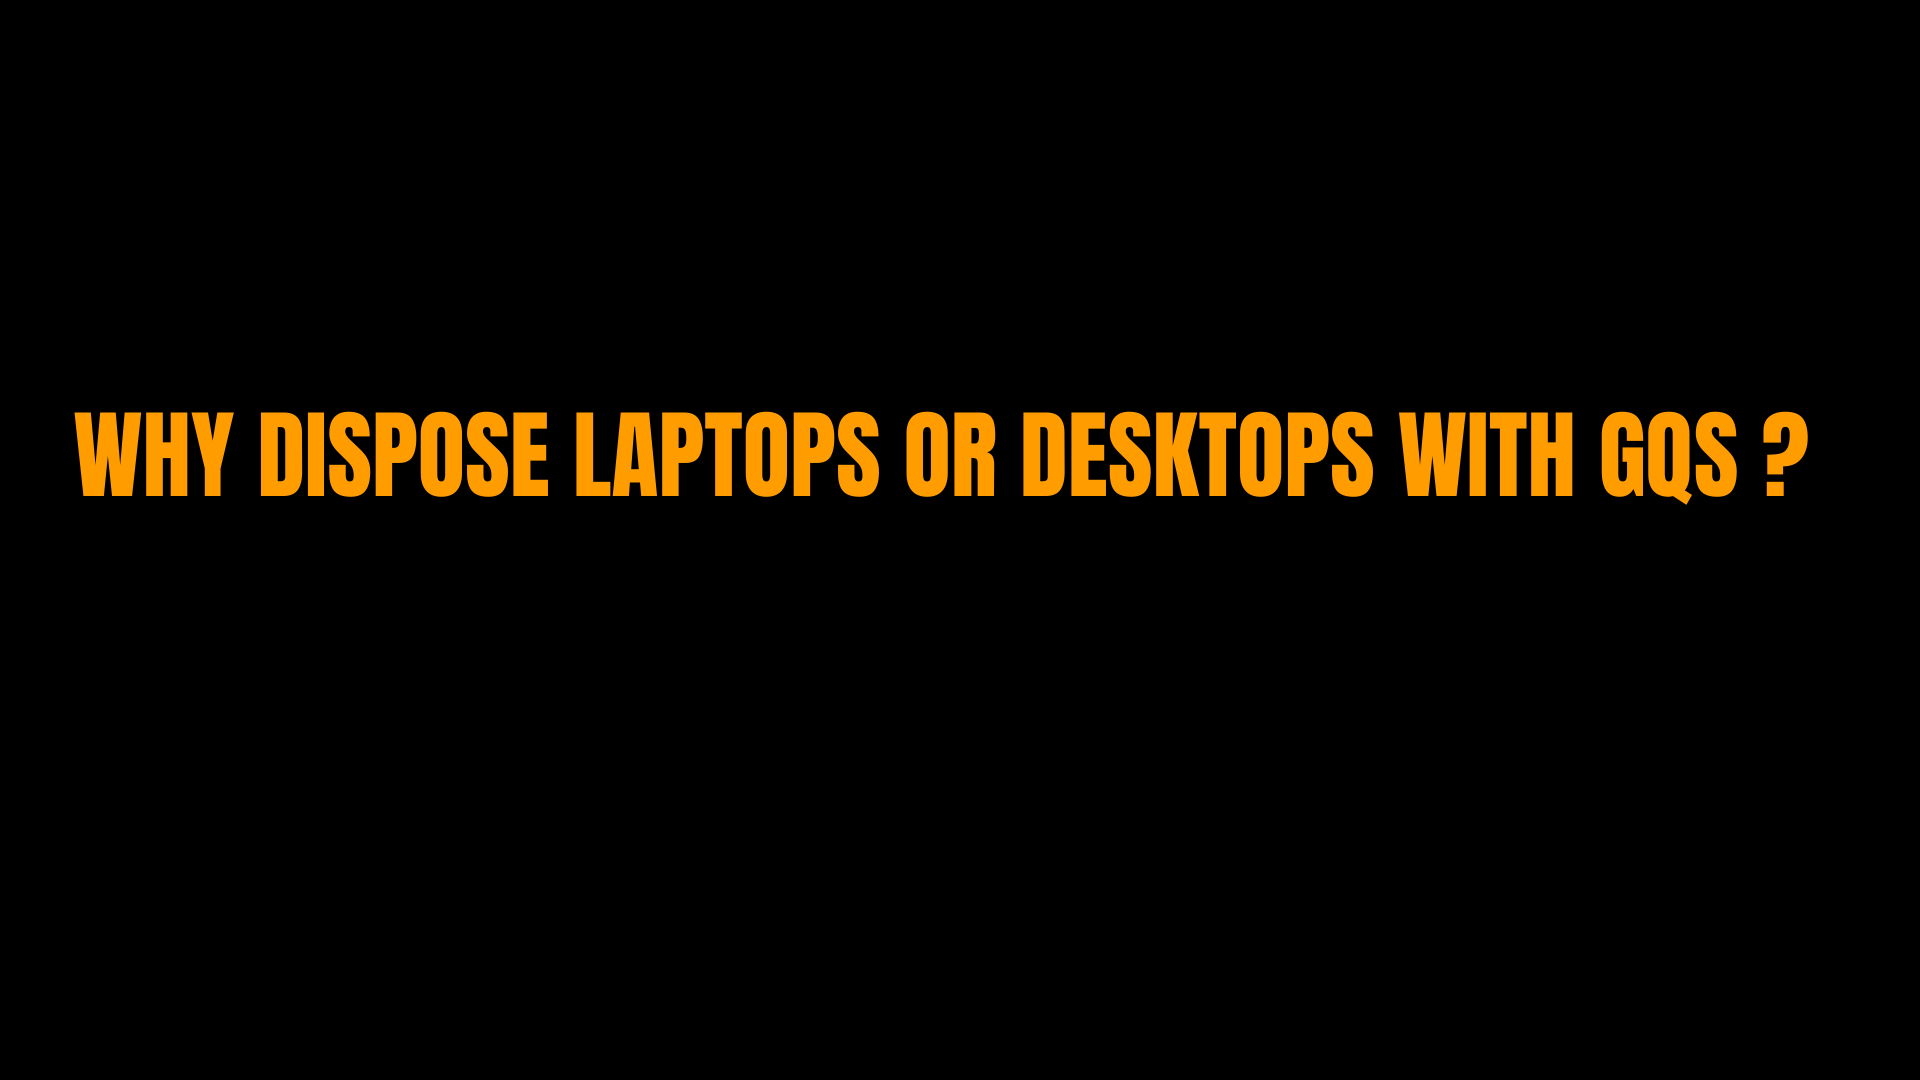 Why dispose laptops or desktops with GQS?